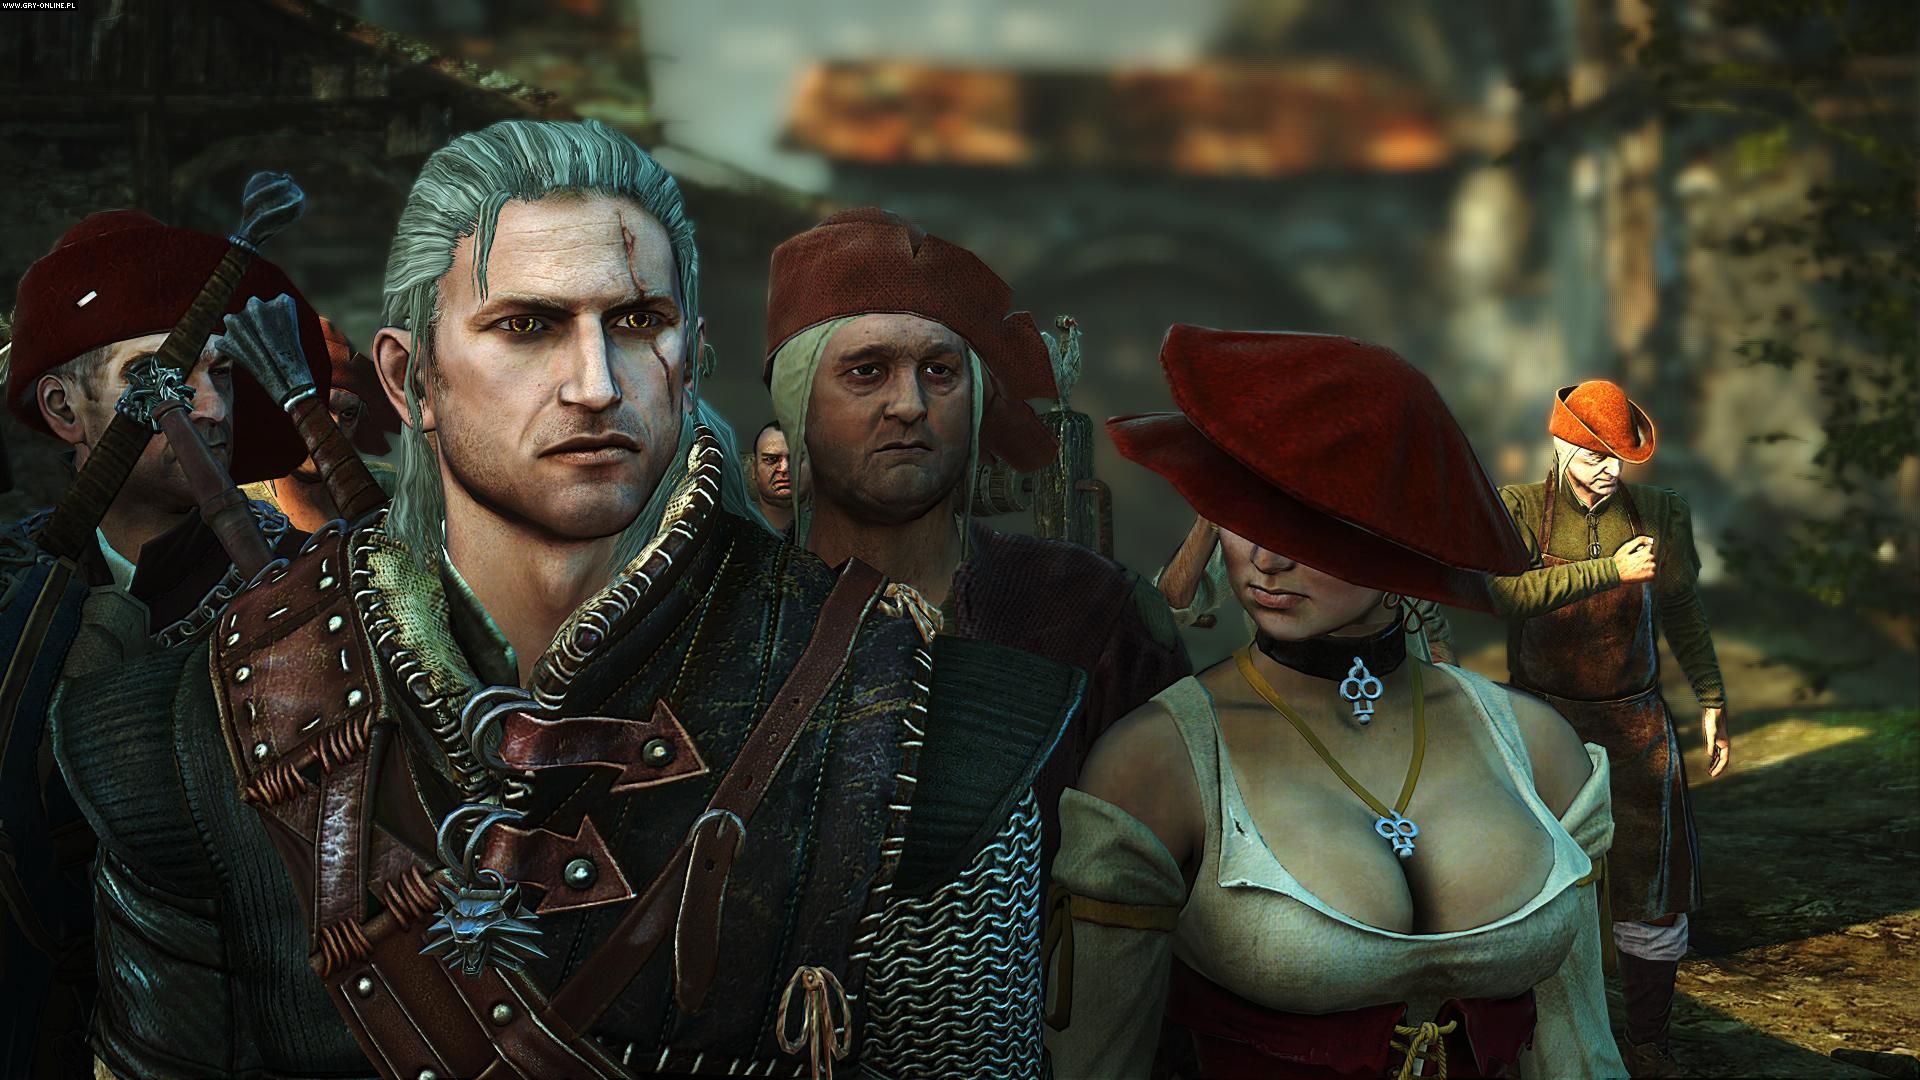 The Witcher 3: Wild Hunt - Official Gameplay (35 min) 